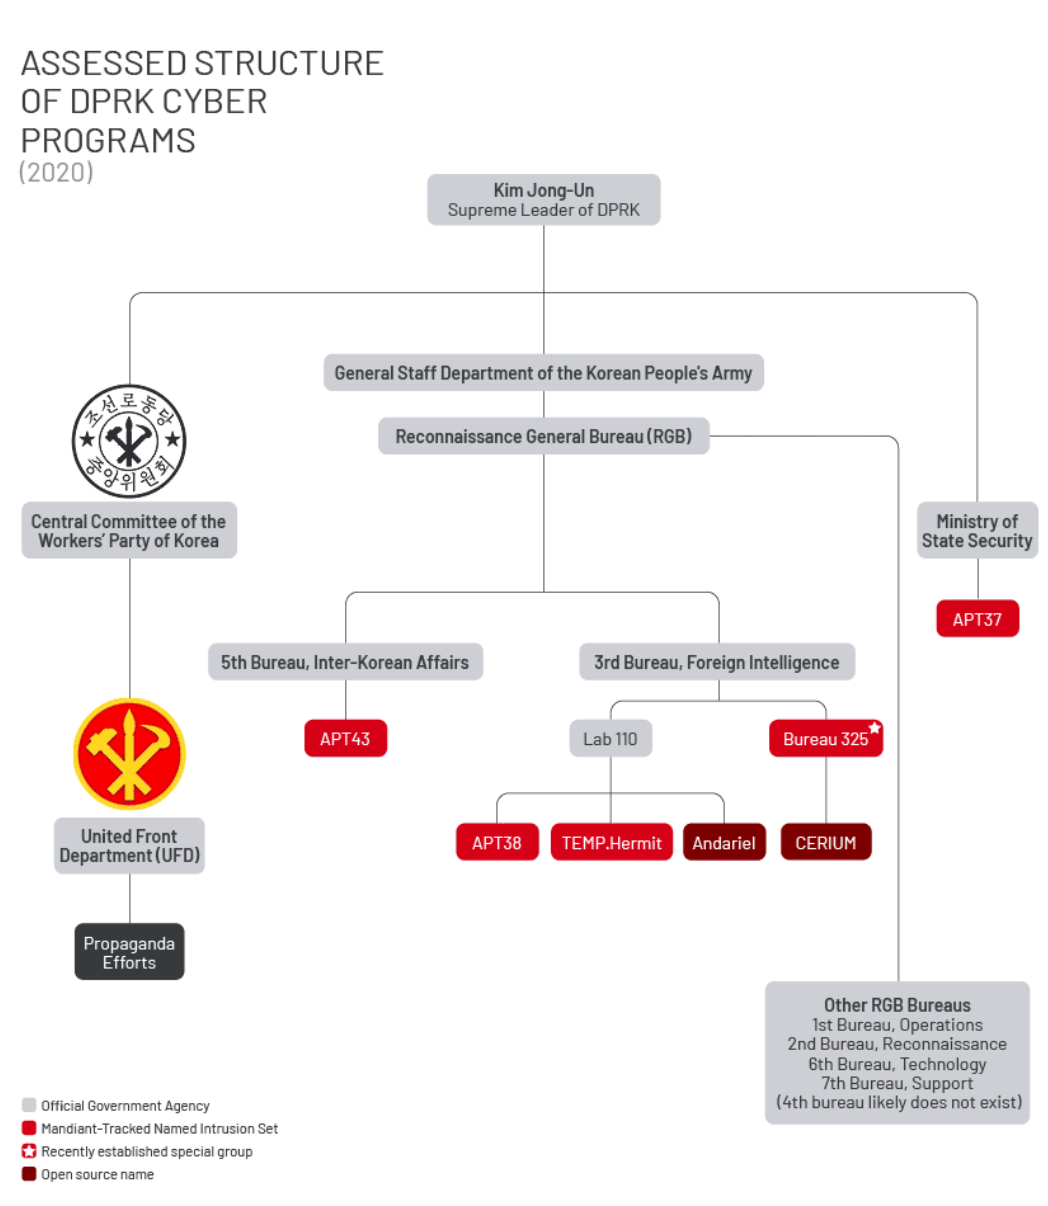 Previously Assessed Organizational Chart for DPRK Cyber 2020